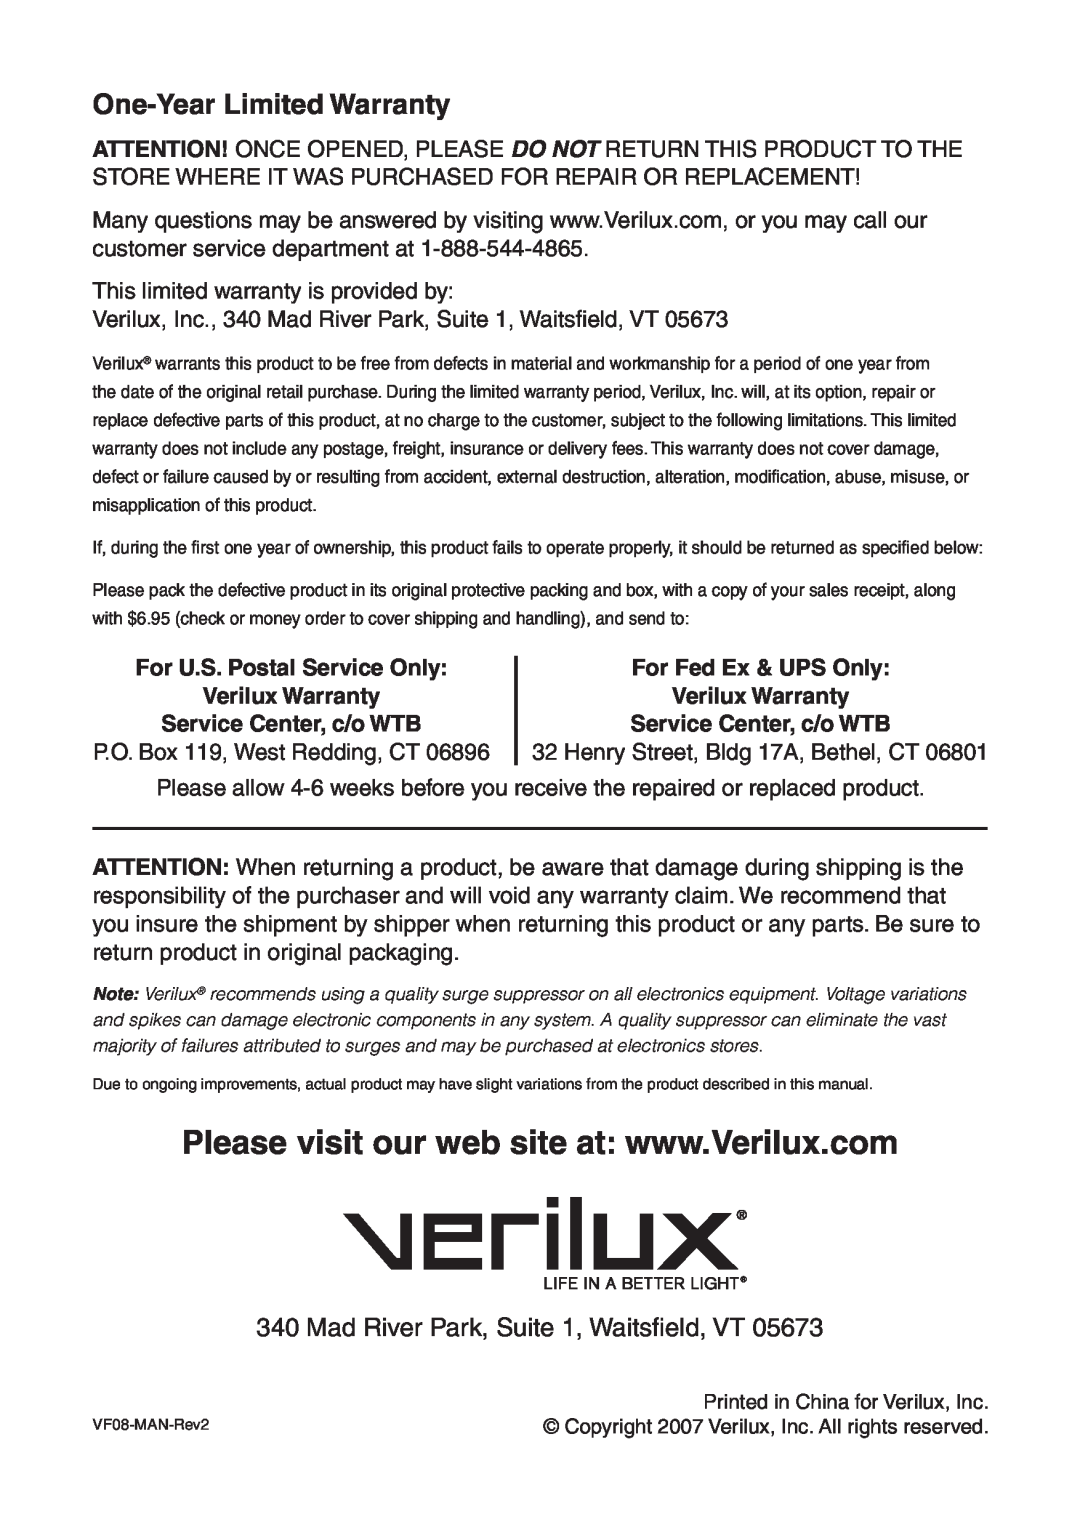 Verilux VF08 manual One-YearLimited Warranty, Mad River Park, Suite 1, Waitsﬁeld, VT, Service Center, c/o WTB 